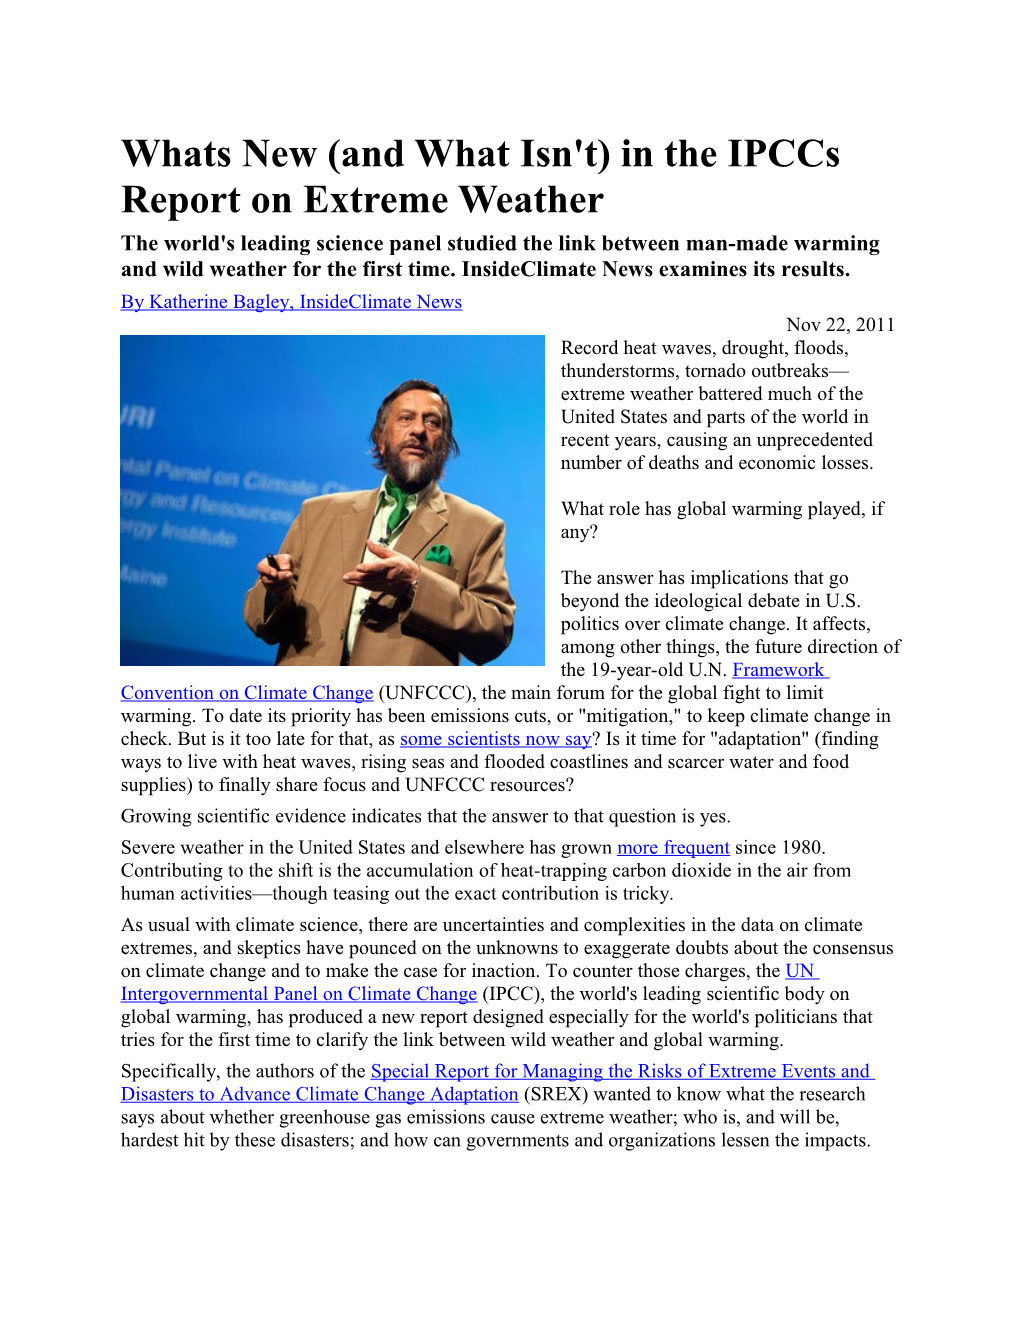 Whats New (And What Isn't) in the Ipccs Report on Extreme Weather